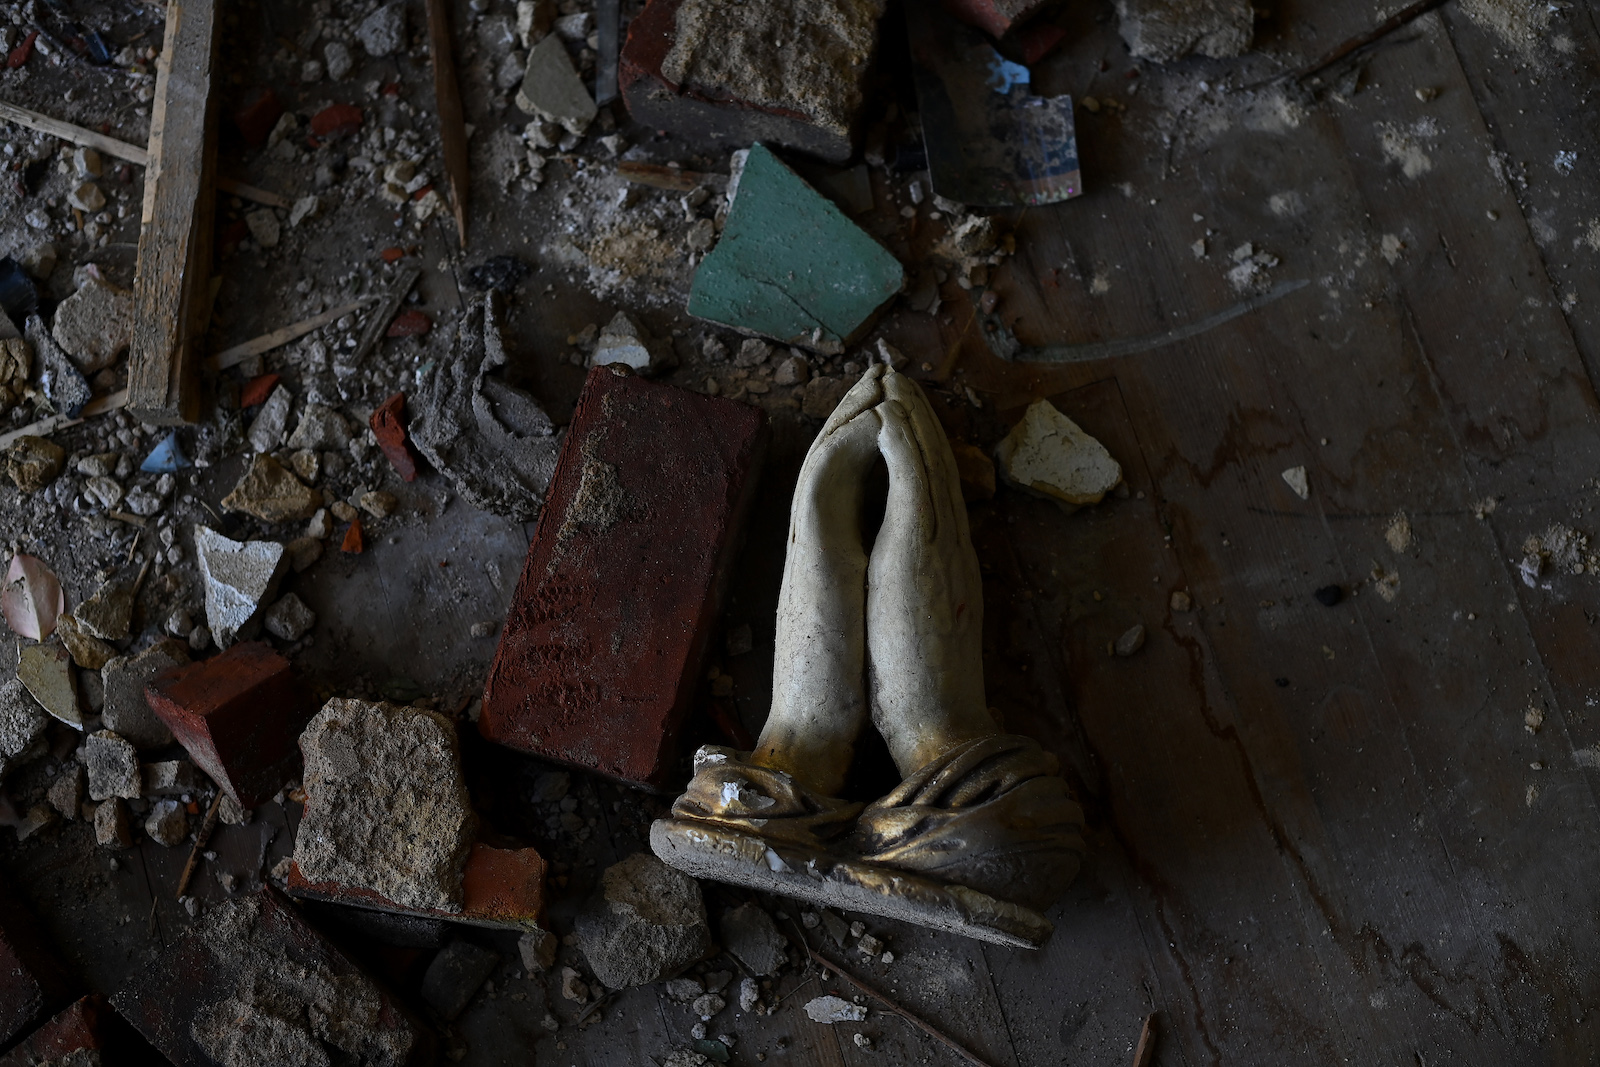 a statue of praying hands in a burned pile of objects